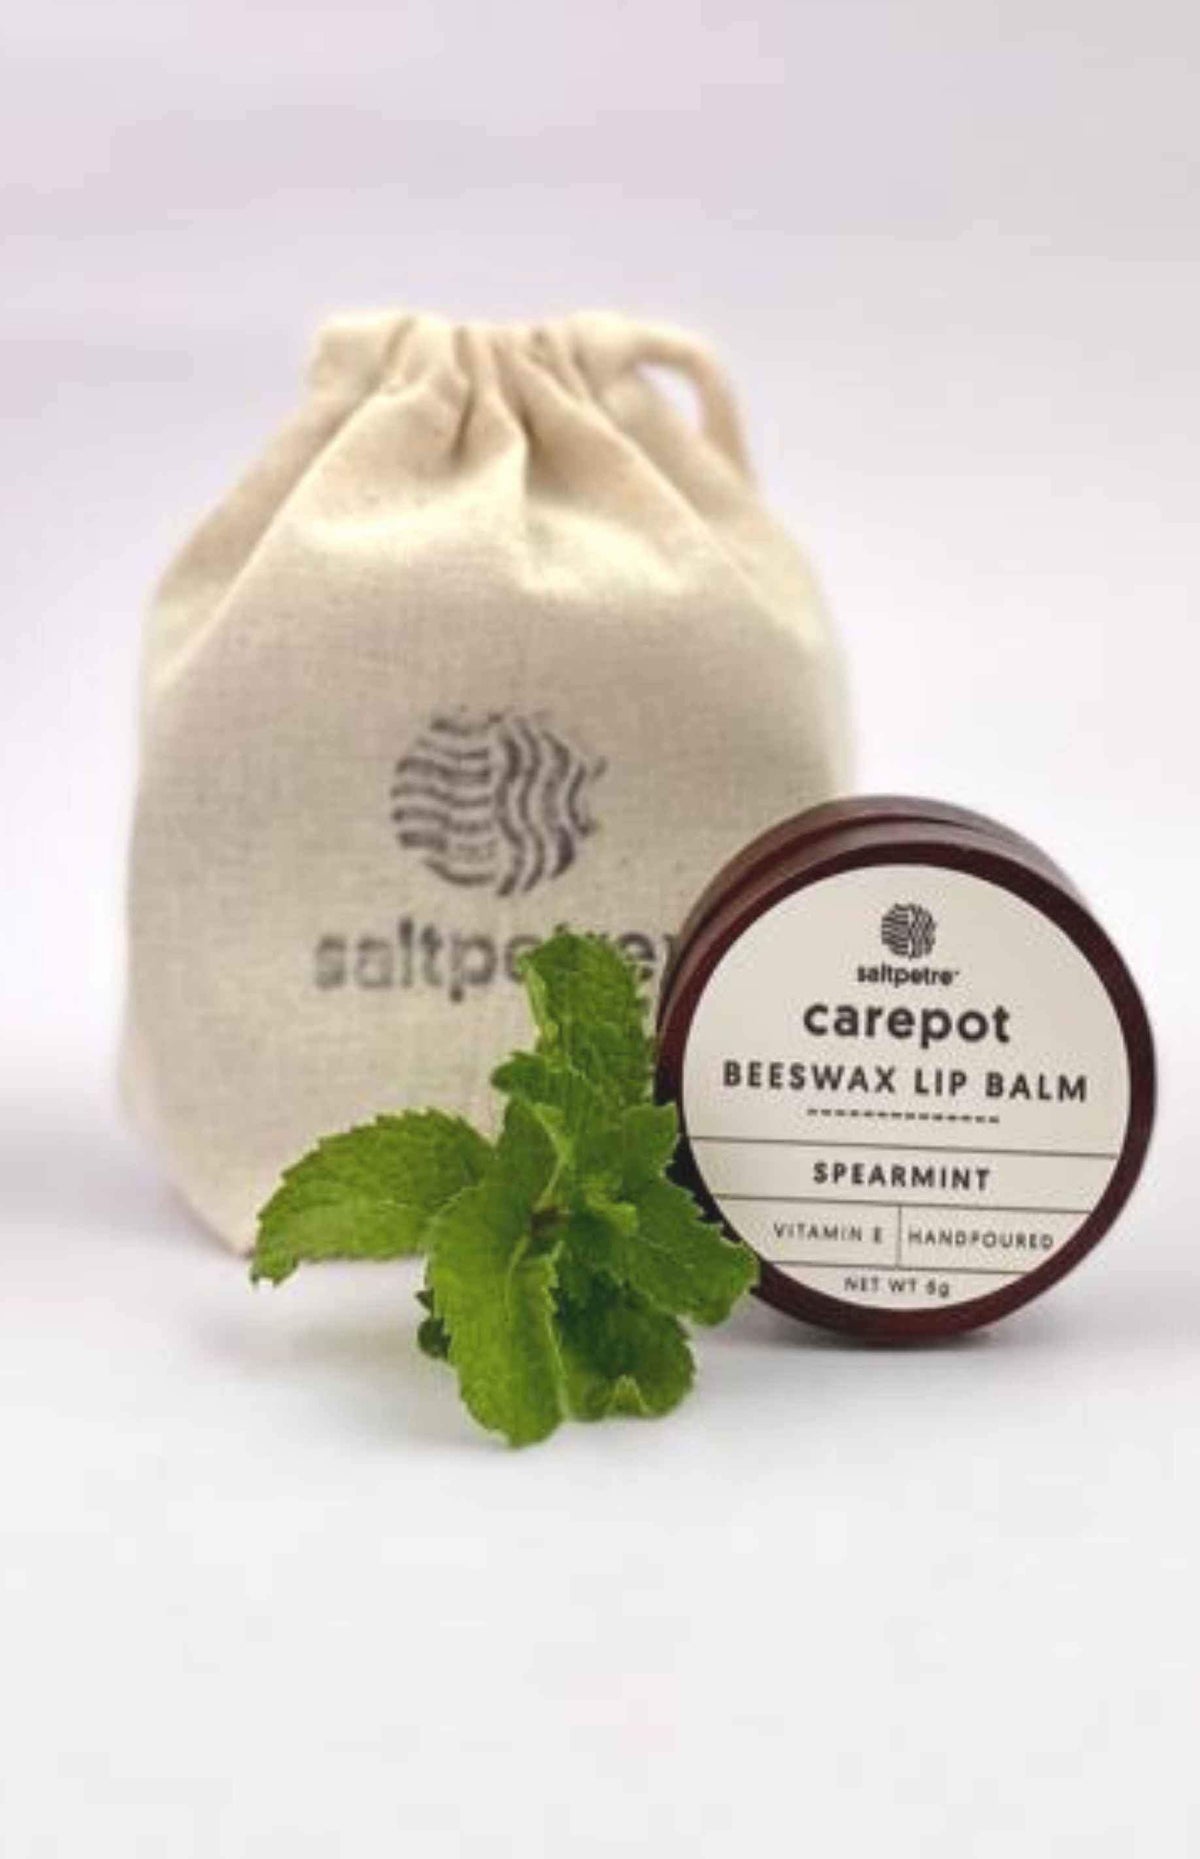 Saltpetre spearmint flavoured lip balm, lipcare, skincare balms, natural plant extracts, handmade skincare gift set